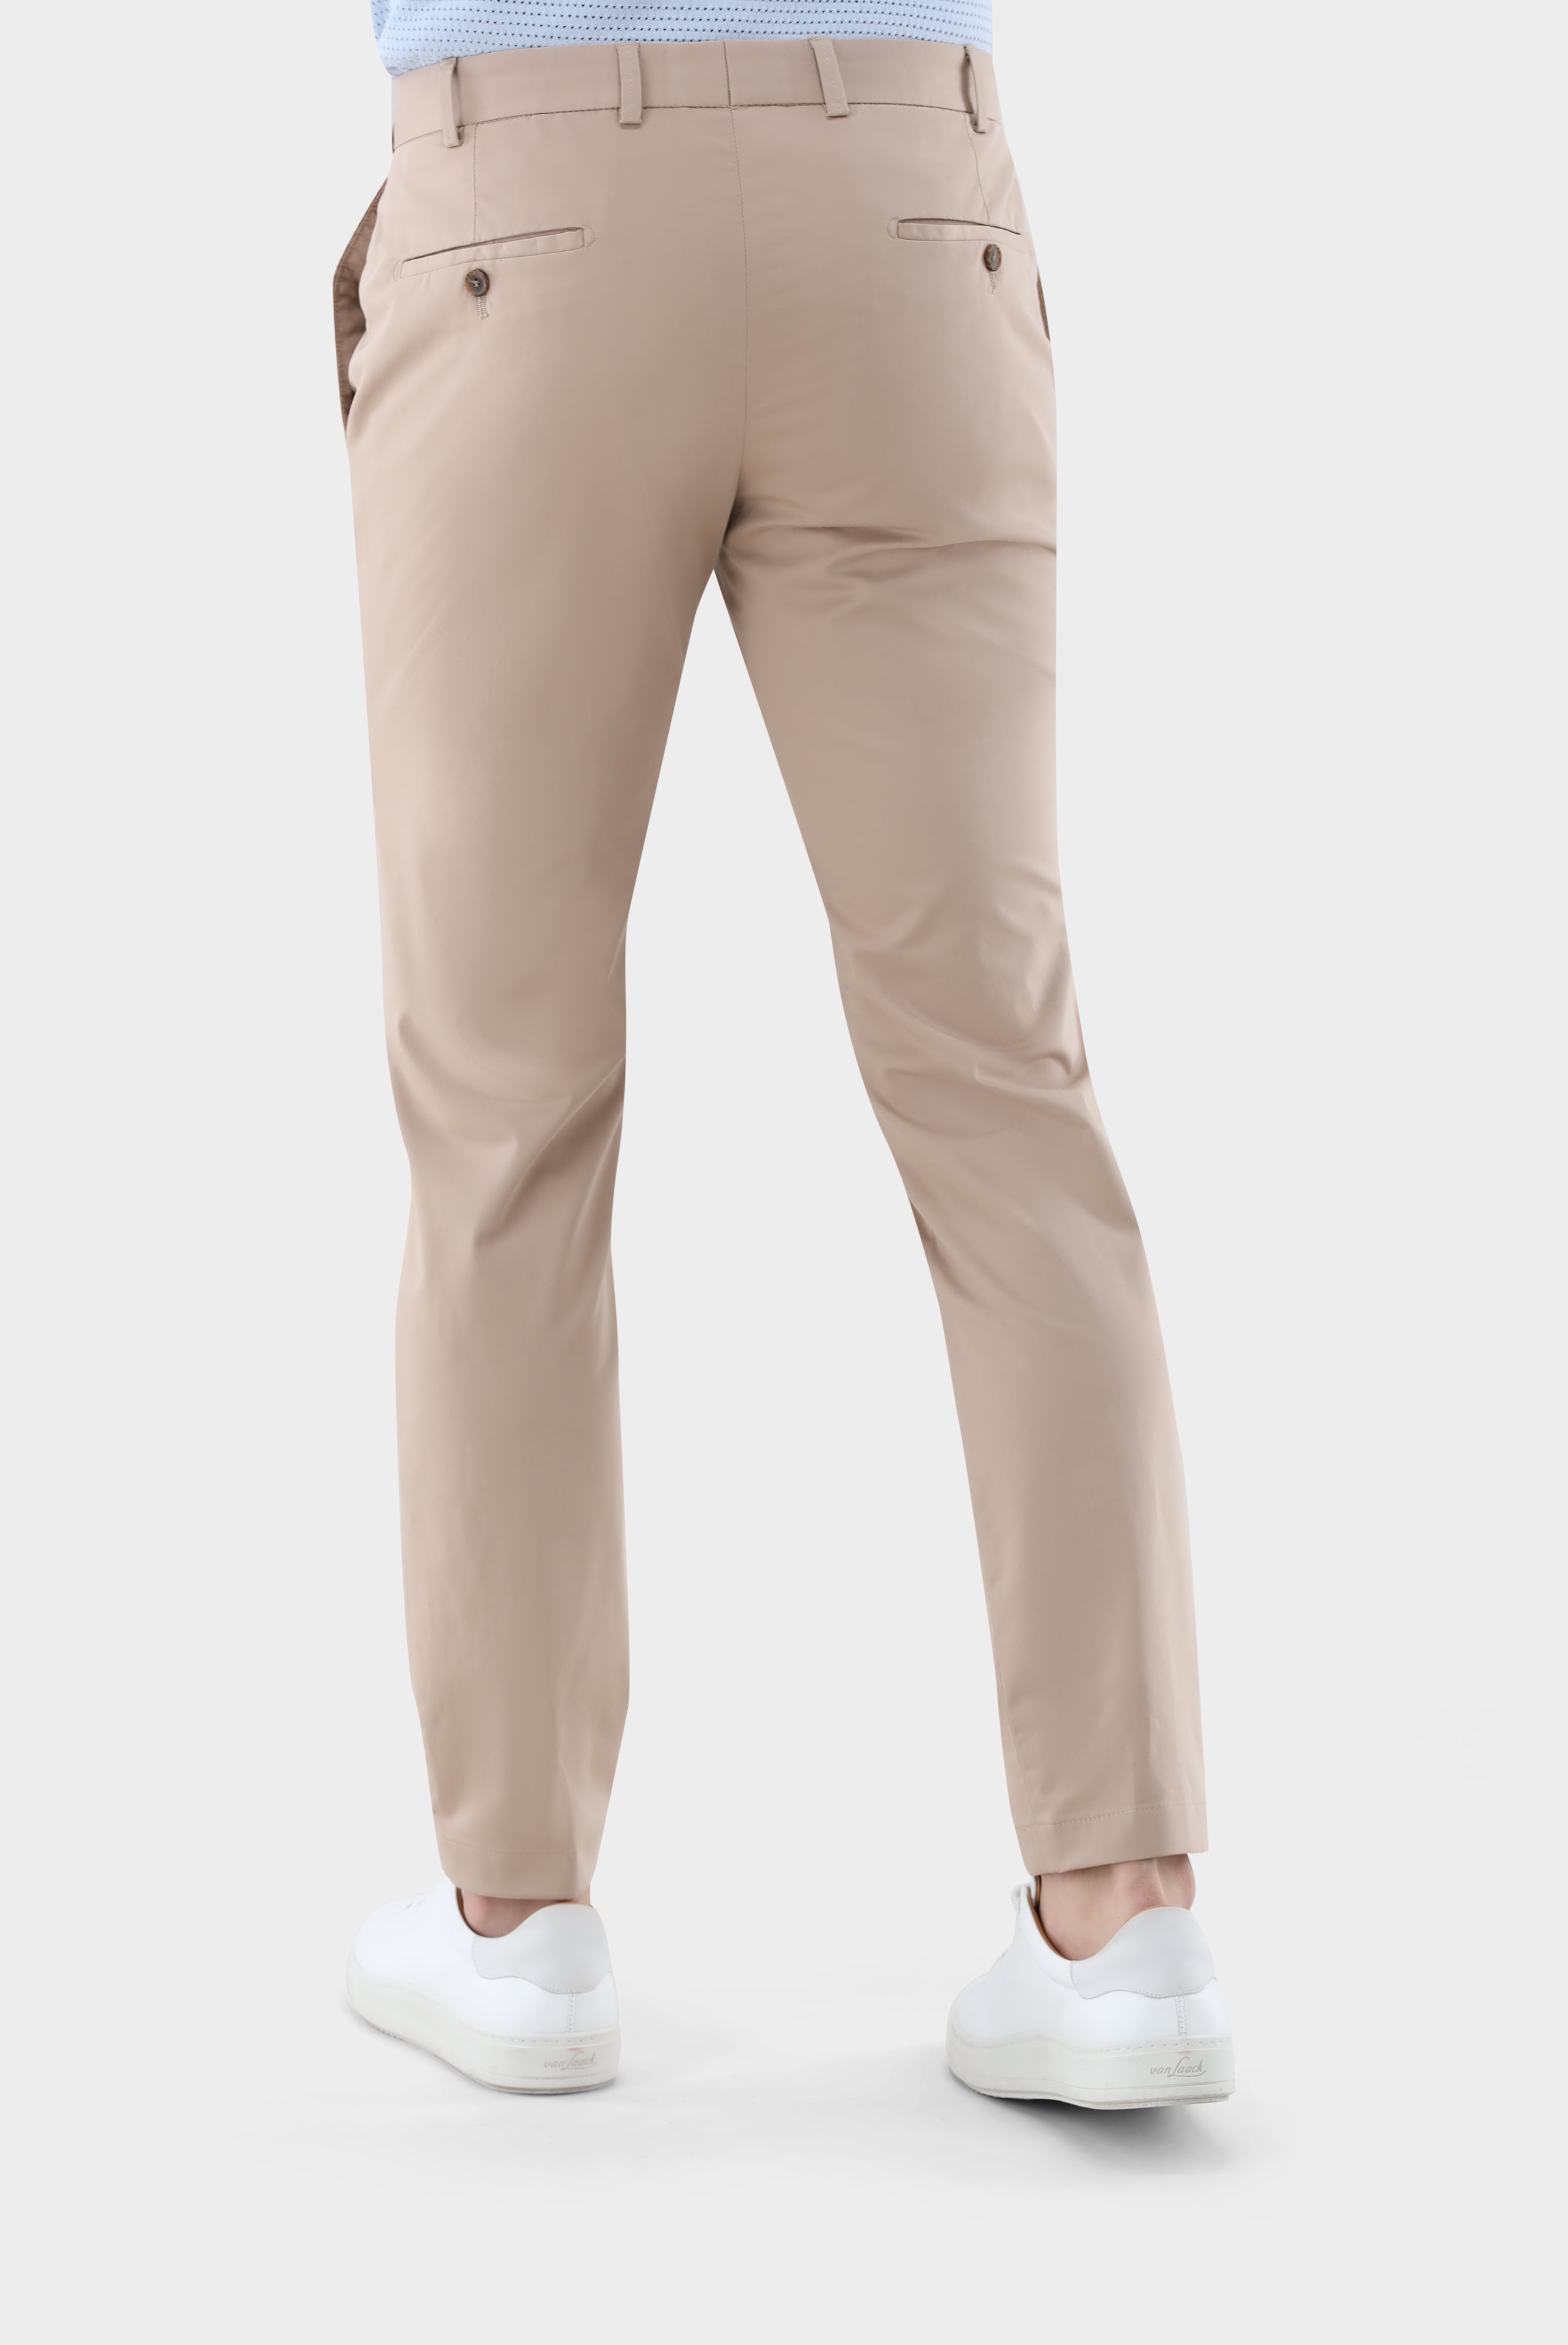 Jeans & Trousers+Cotton with Stretch Tapered Chinos+80.7858..J00151.140.46